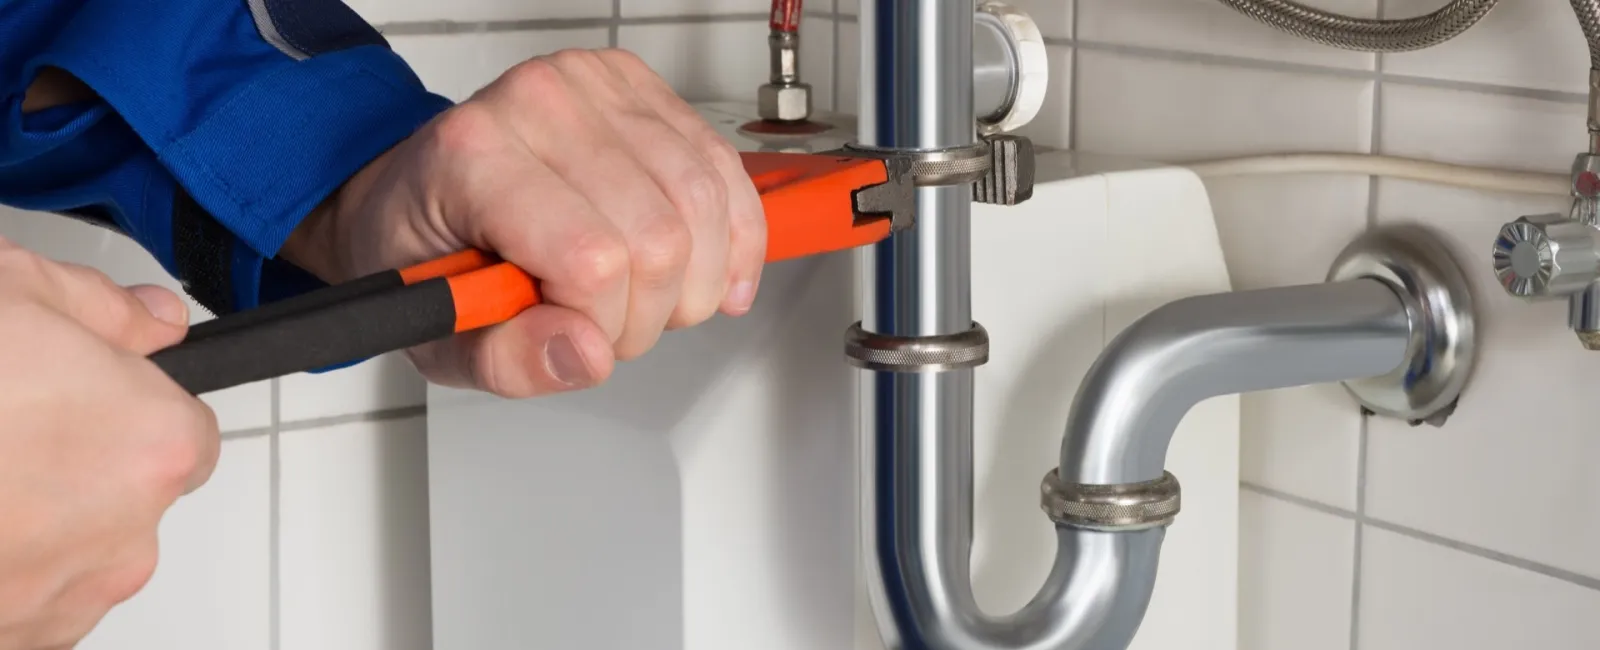 5 trends that will dominate plumbing news in 2014